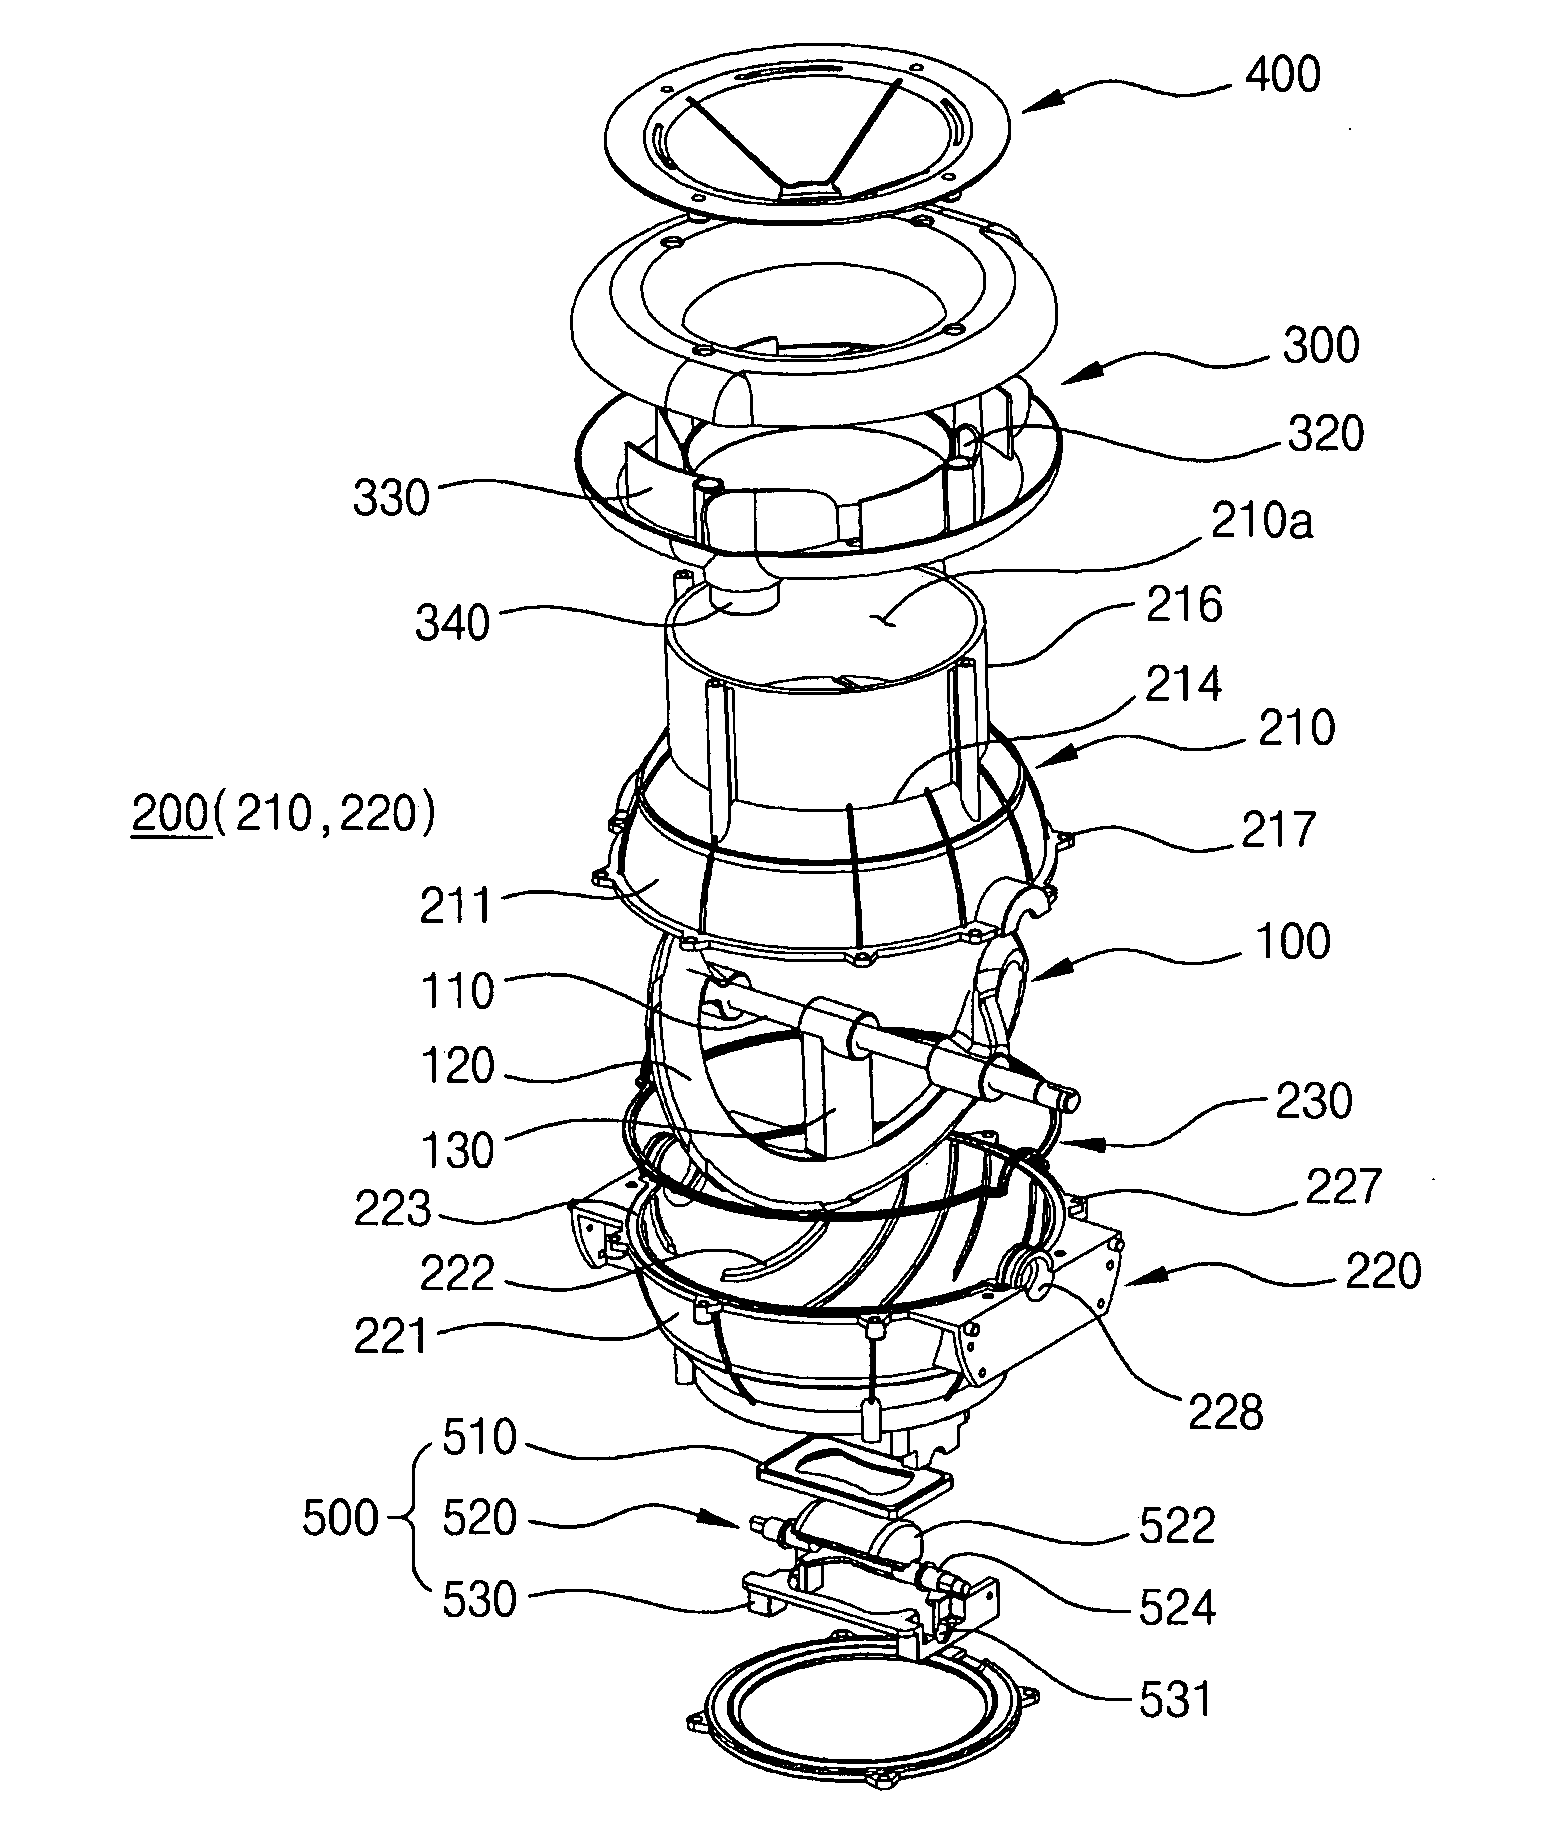 Pulverizer for food waste treatment apparatus